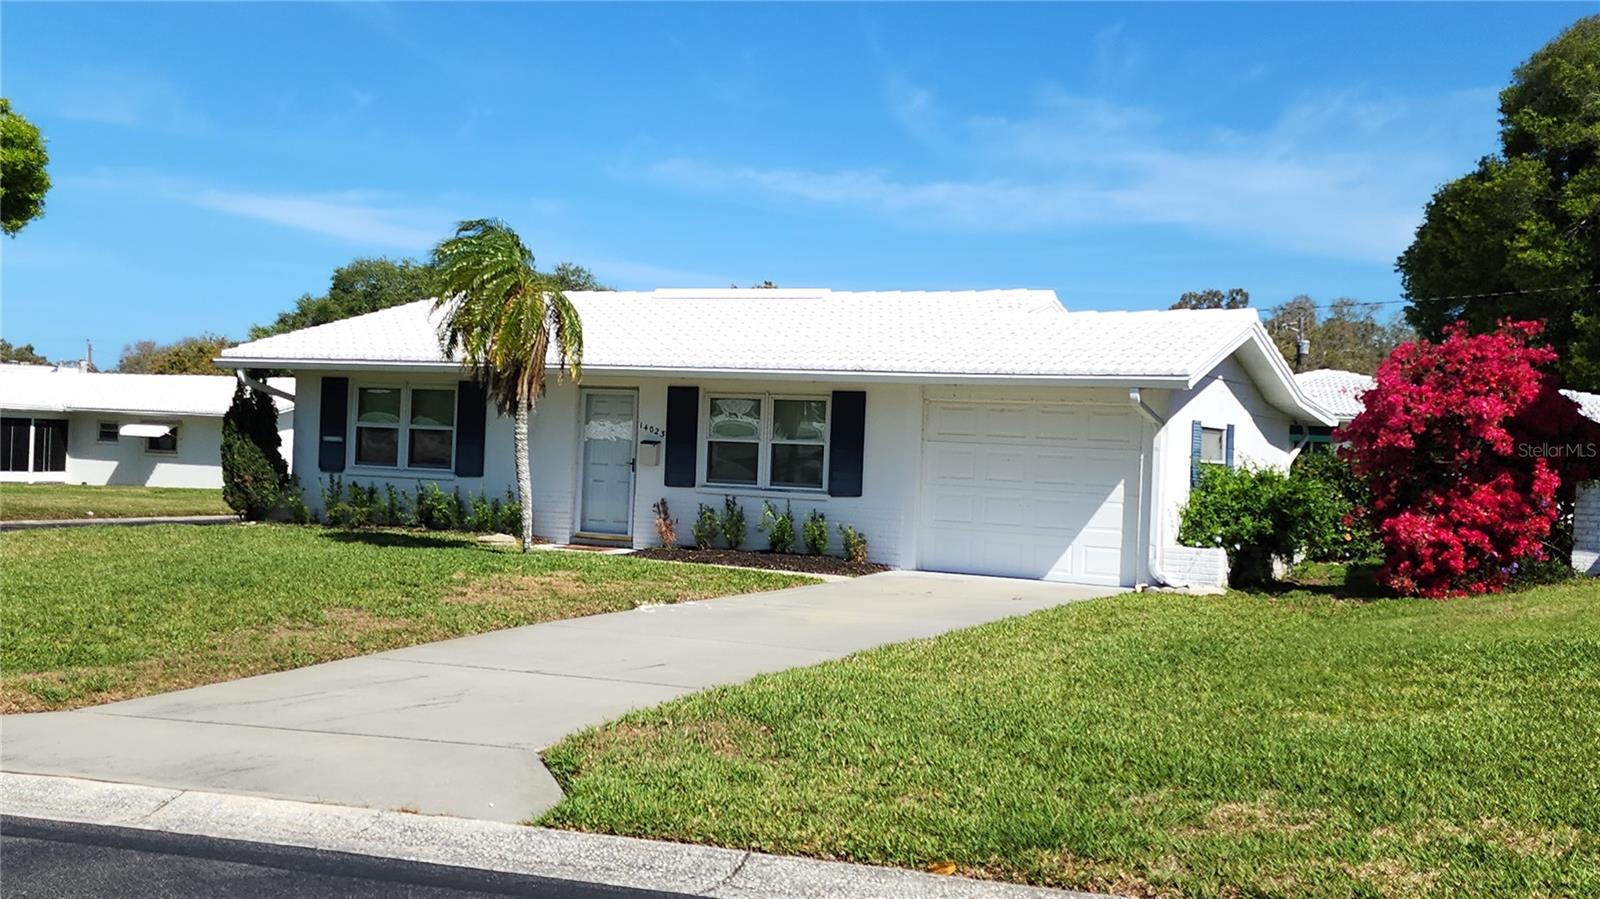 2 bedroom, 1 bath, 1 car attached garage home with very low HOA monthly fees.